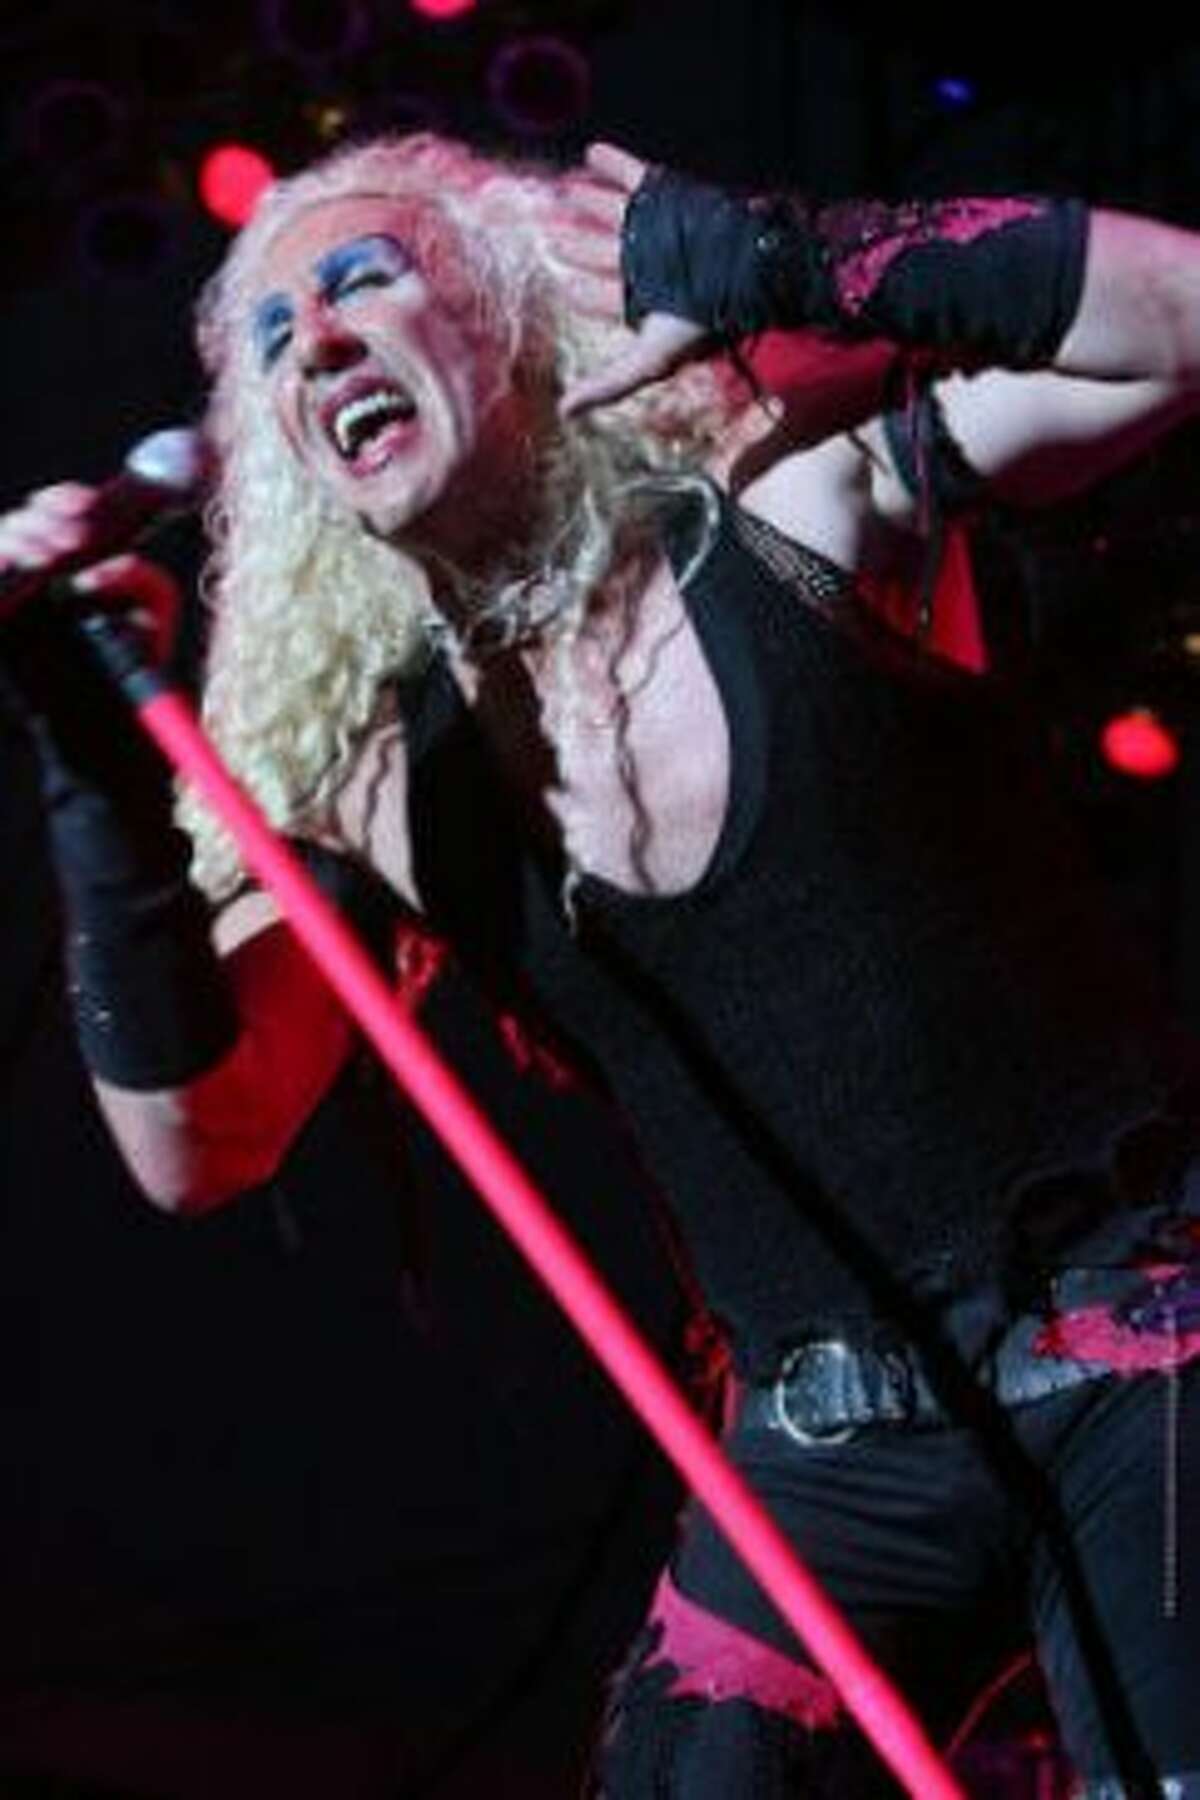 Dee Snider asked Paul Ryan's camp to stop playing his song, "We're not gonna take it." A statement from Snider reads, “I emphatically denounce Paul Ryan’s use of my band Twisted Sister’s song ‘We’re Not Gonna Take It’ in any capacity. There is almost nothing he stands for that I agree with except the use of the P90X.” Ryan spokesman Brandon Buck said in response: "We're not gonna play it anymore." Click through the slideshow to see more feuds between musicians and politicians. (Bill Olive / SF Chronicle)